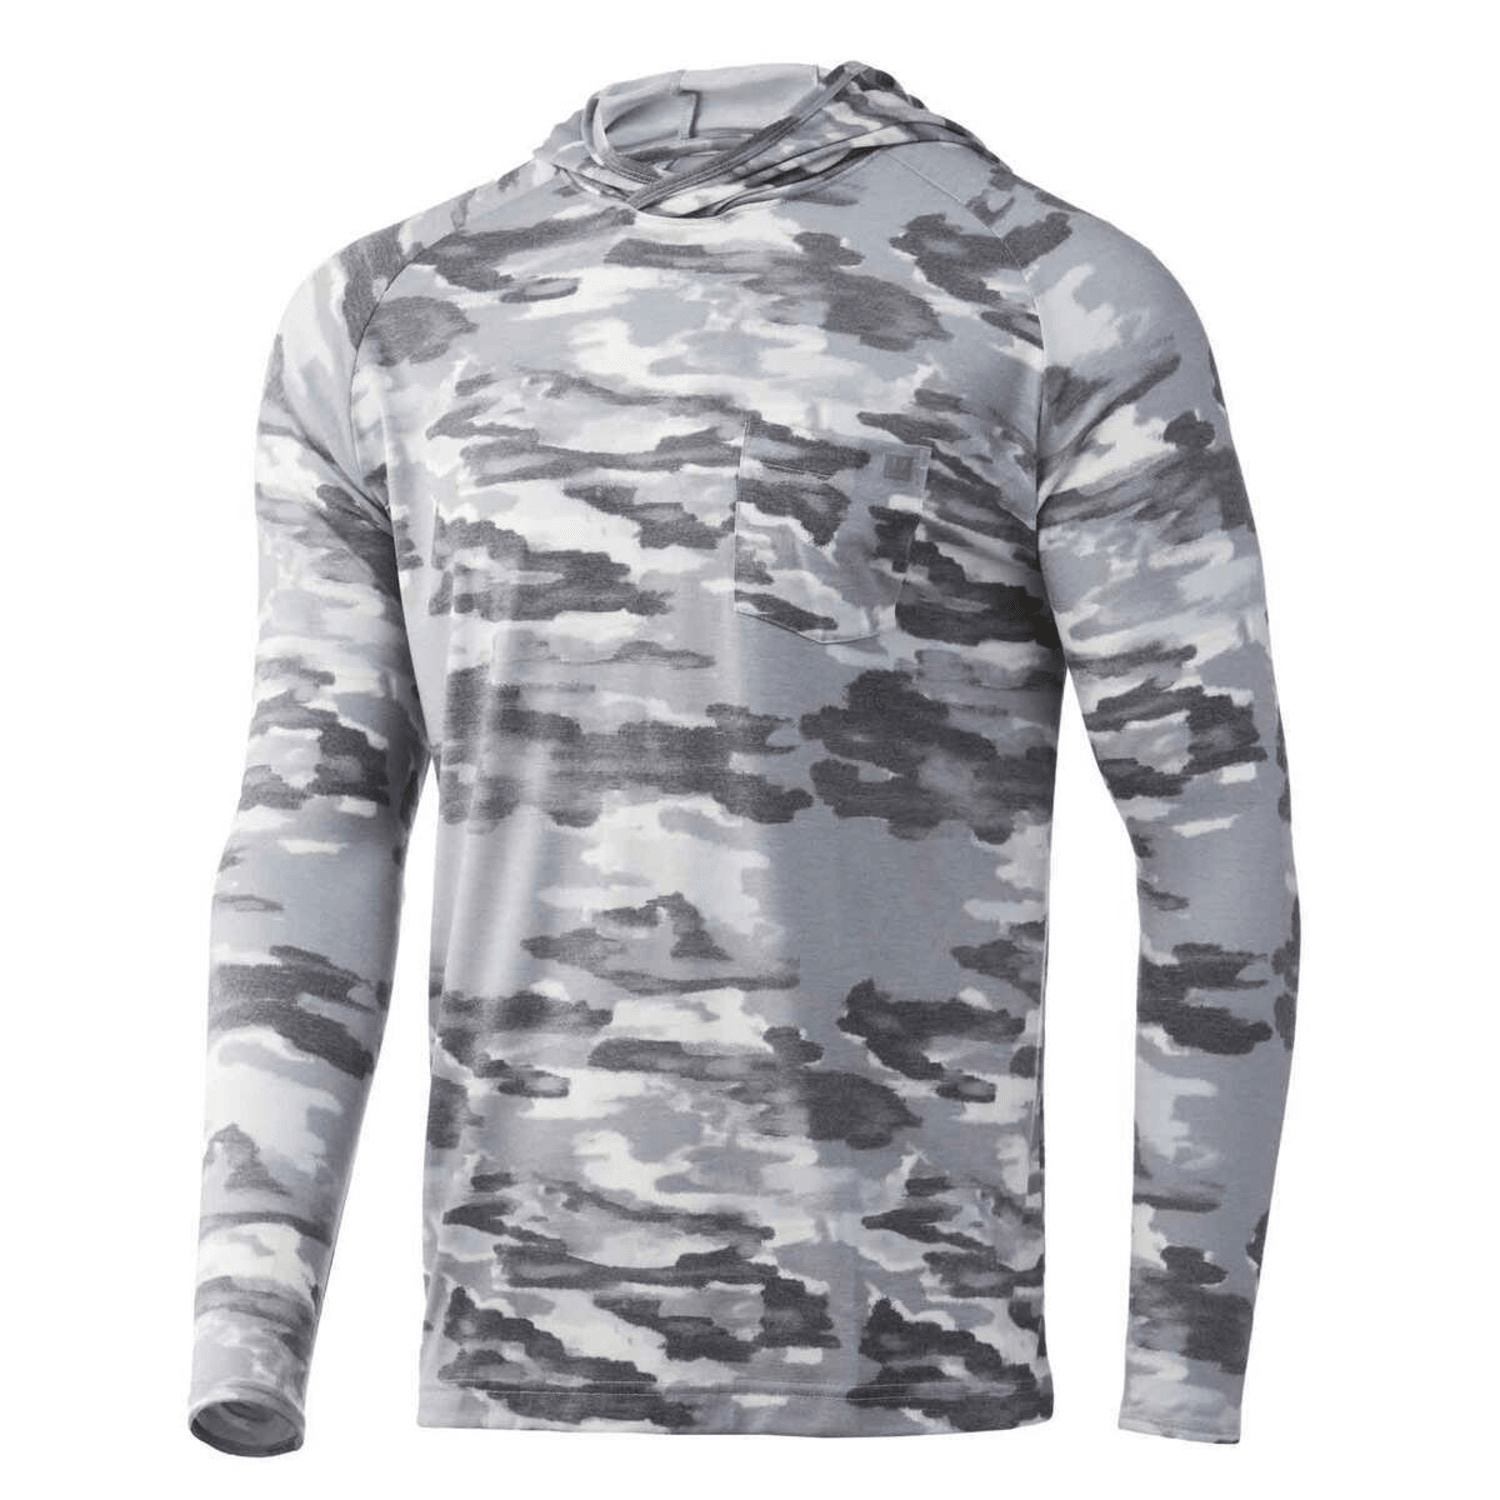 https://res.cloudinary.com/great-lakes-outpost/image/upload/t_vsf_productFeed/f_png/q_auto/HUKGH1200460032M-huk-mens-waypoint-edisto-fishing-hoodie-overcast-grey-m-1727685-1?_a=BBDAACAD0